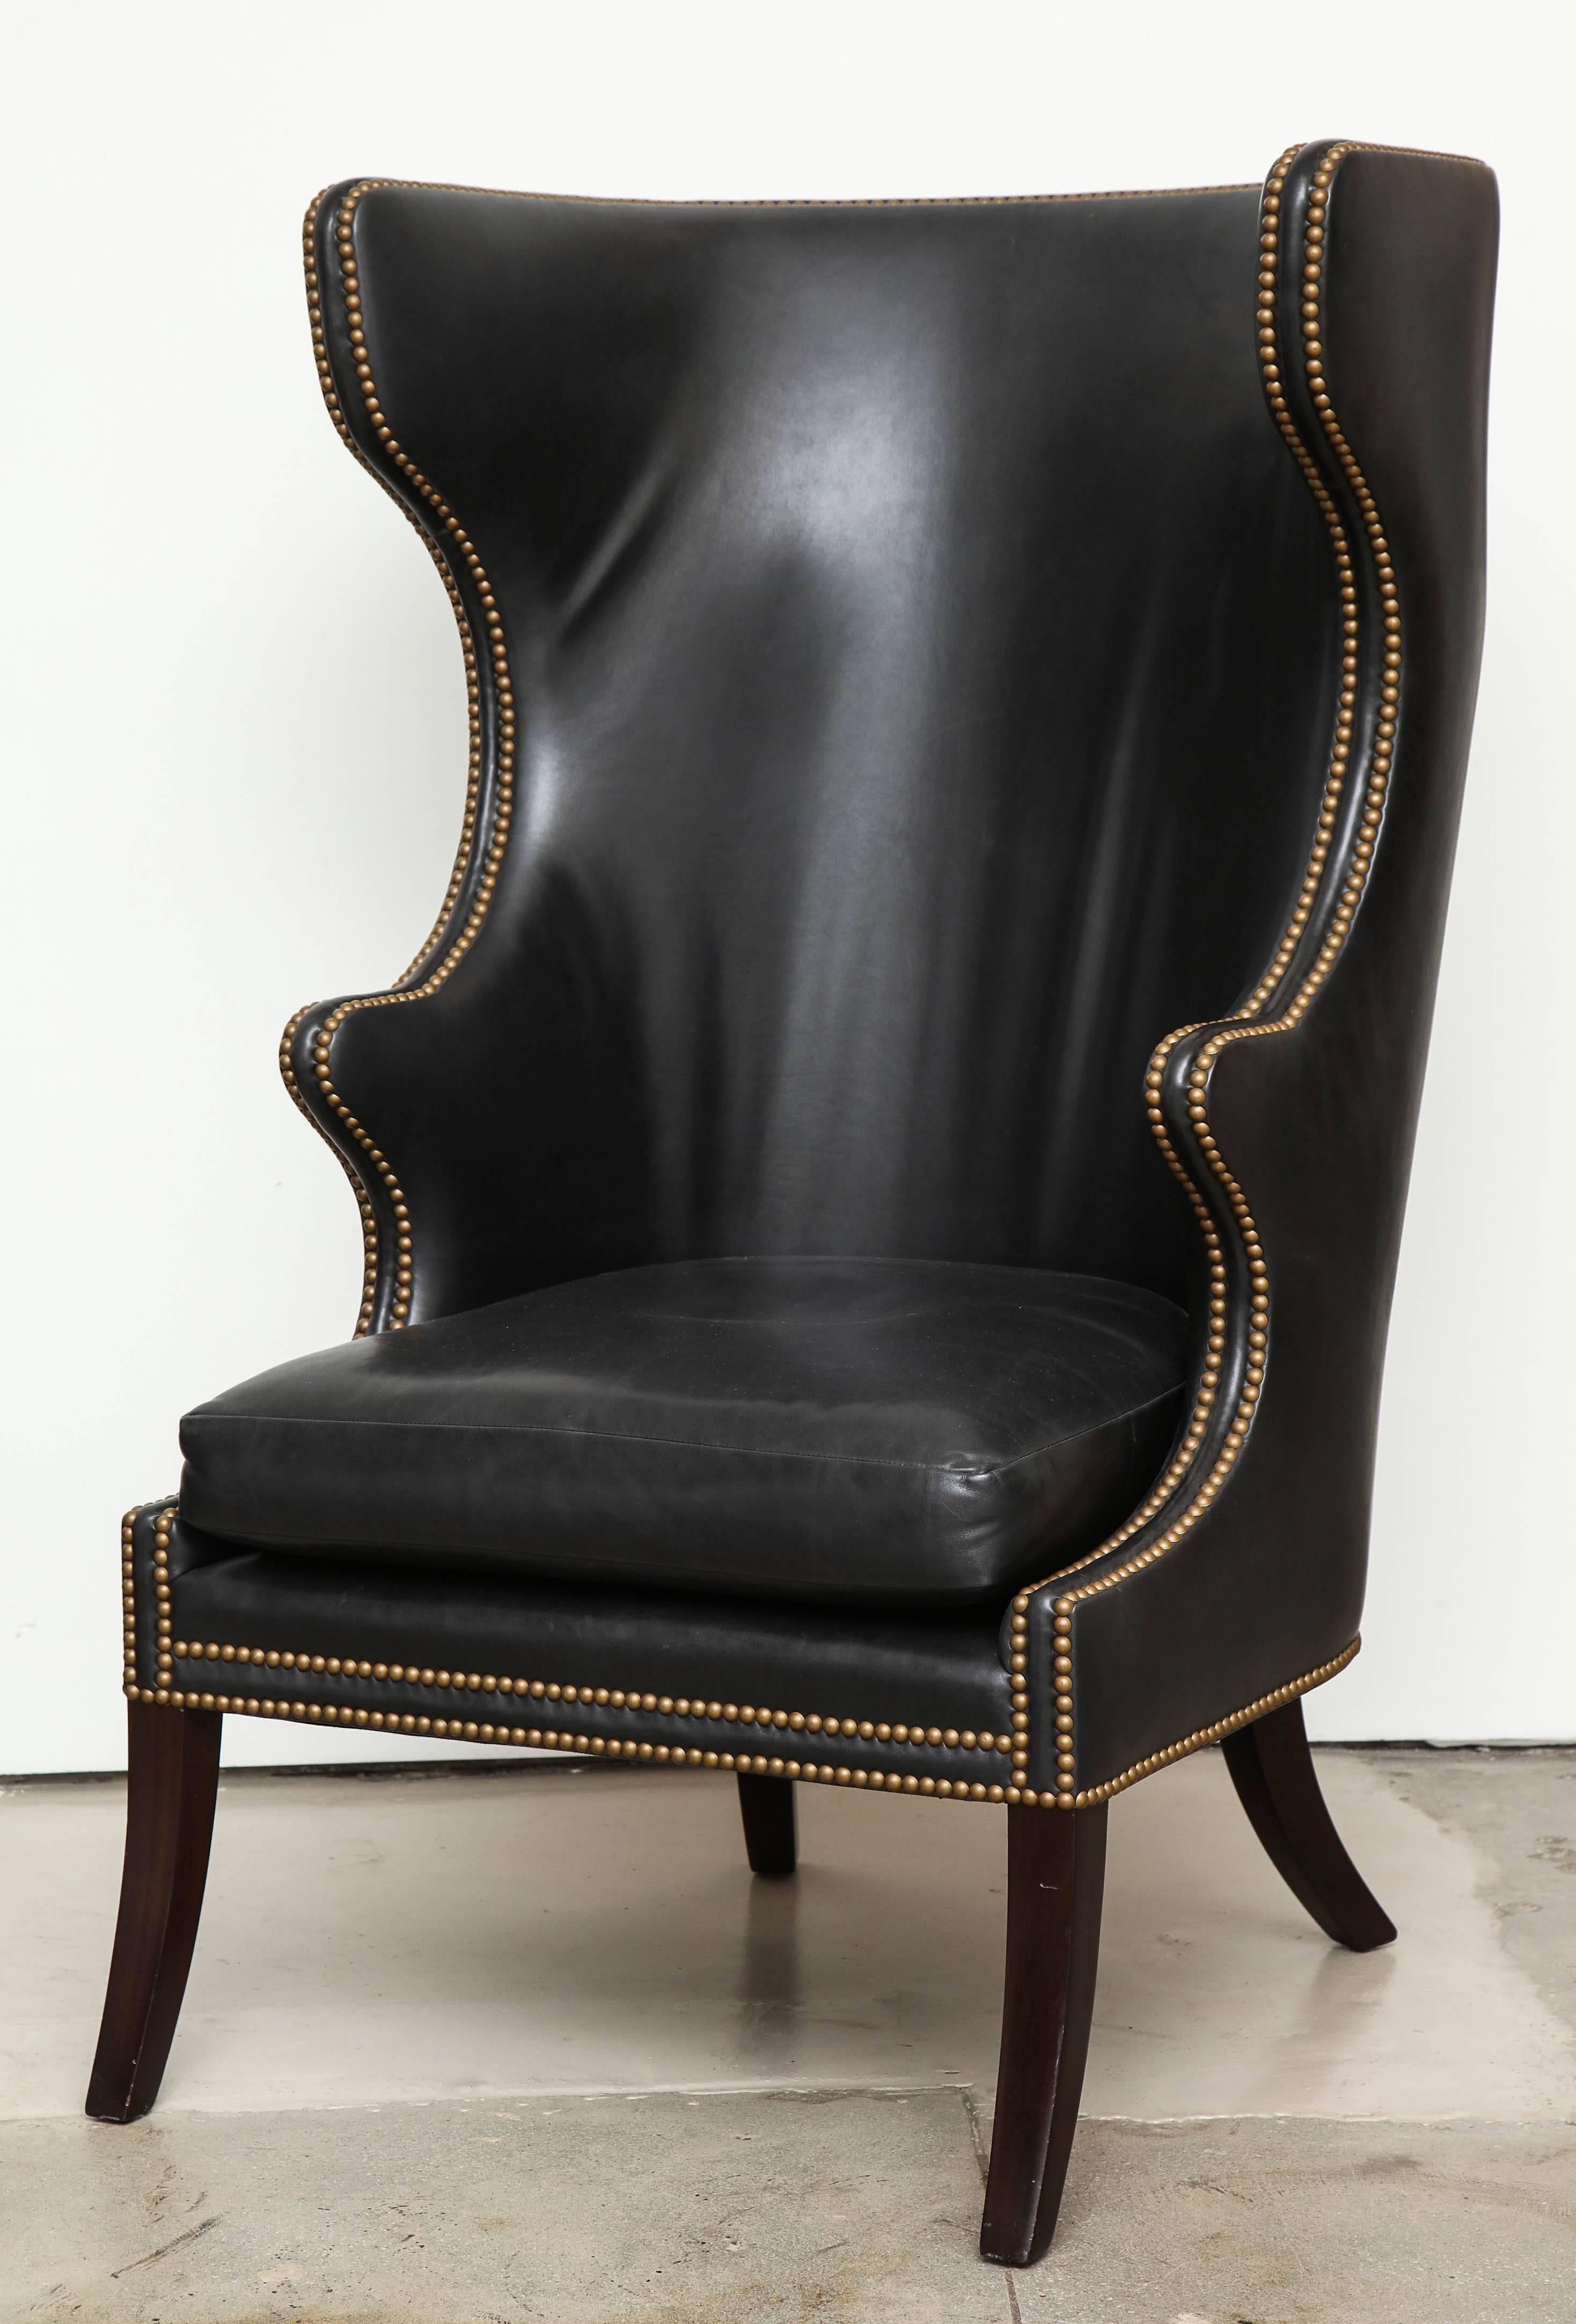 High back black leather chair from an unknown designer, circa 1980. Excellent condition, no cracking in leather.

Anonymous
Chair, circa 1980
Leather, mahogany
Measure: 49